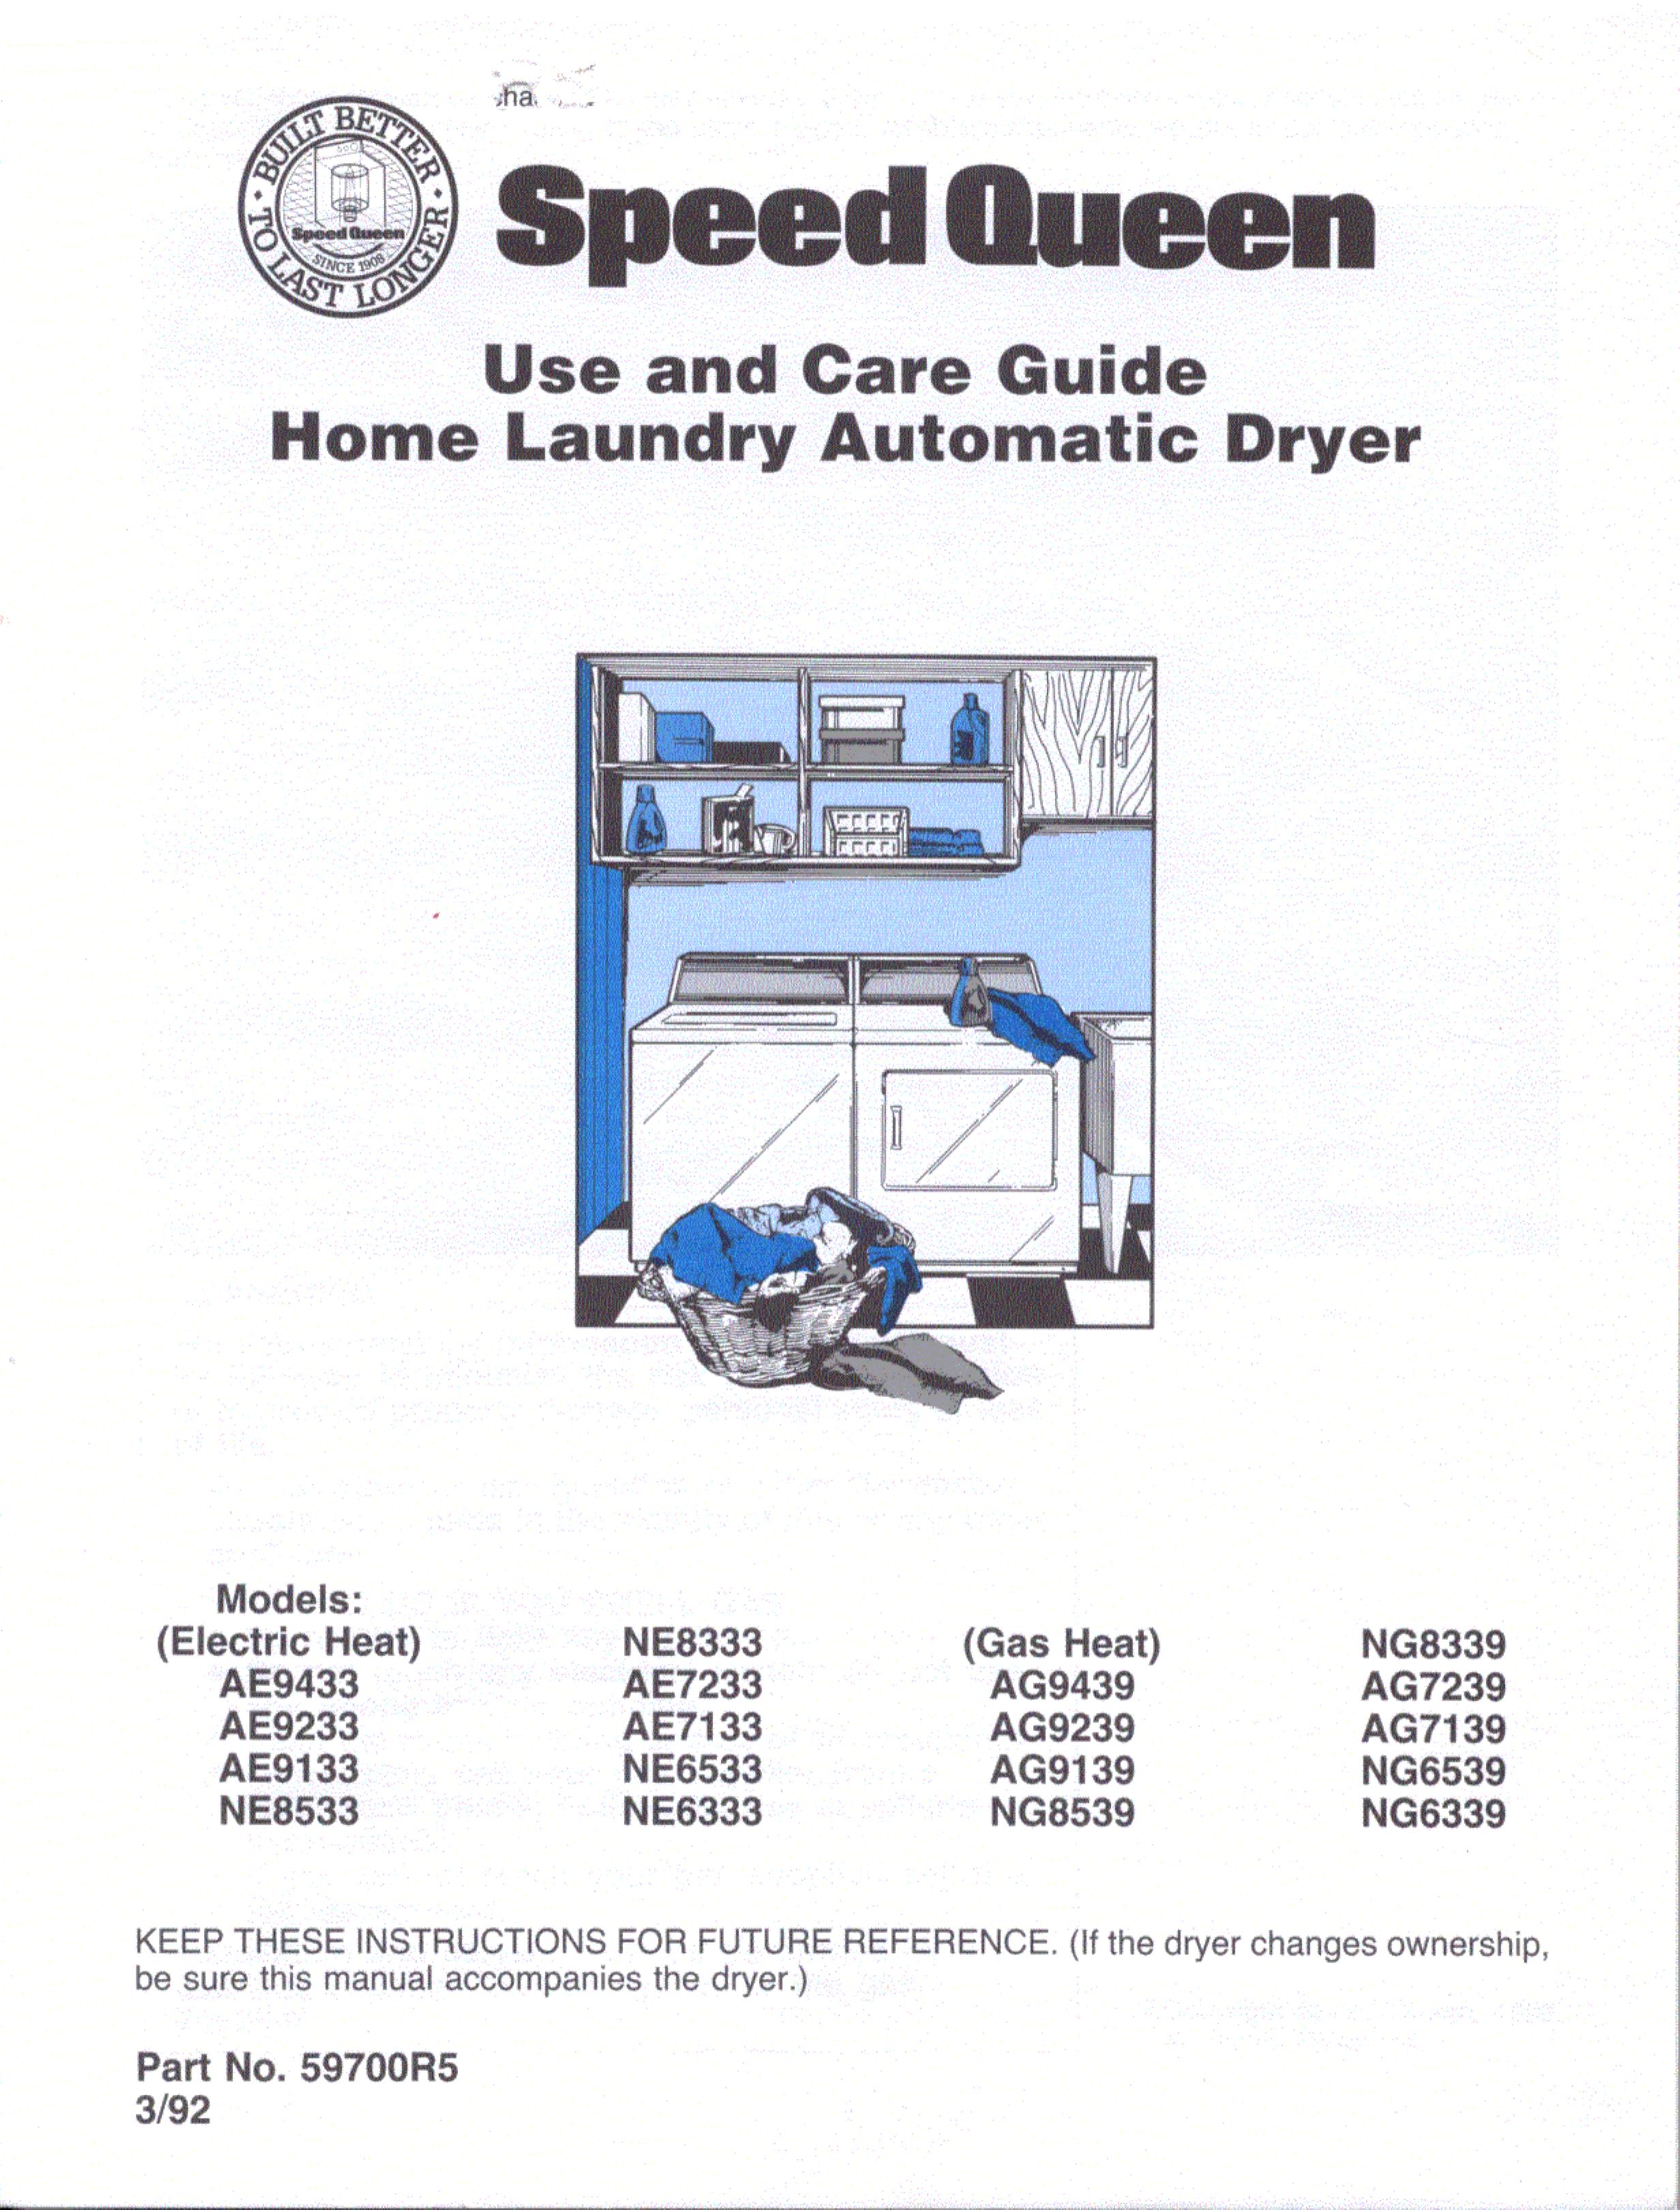 Speed Queen AE9233 Clothes Dryer User Manual